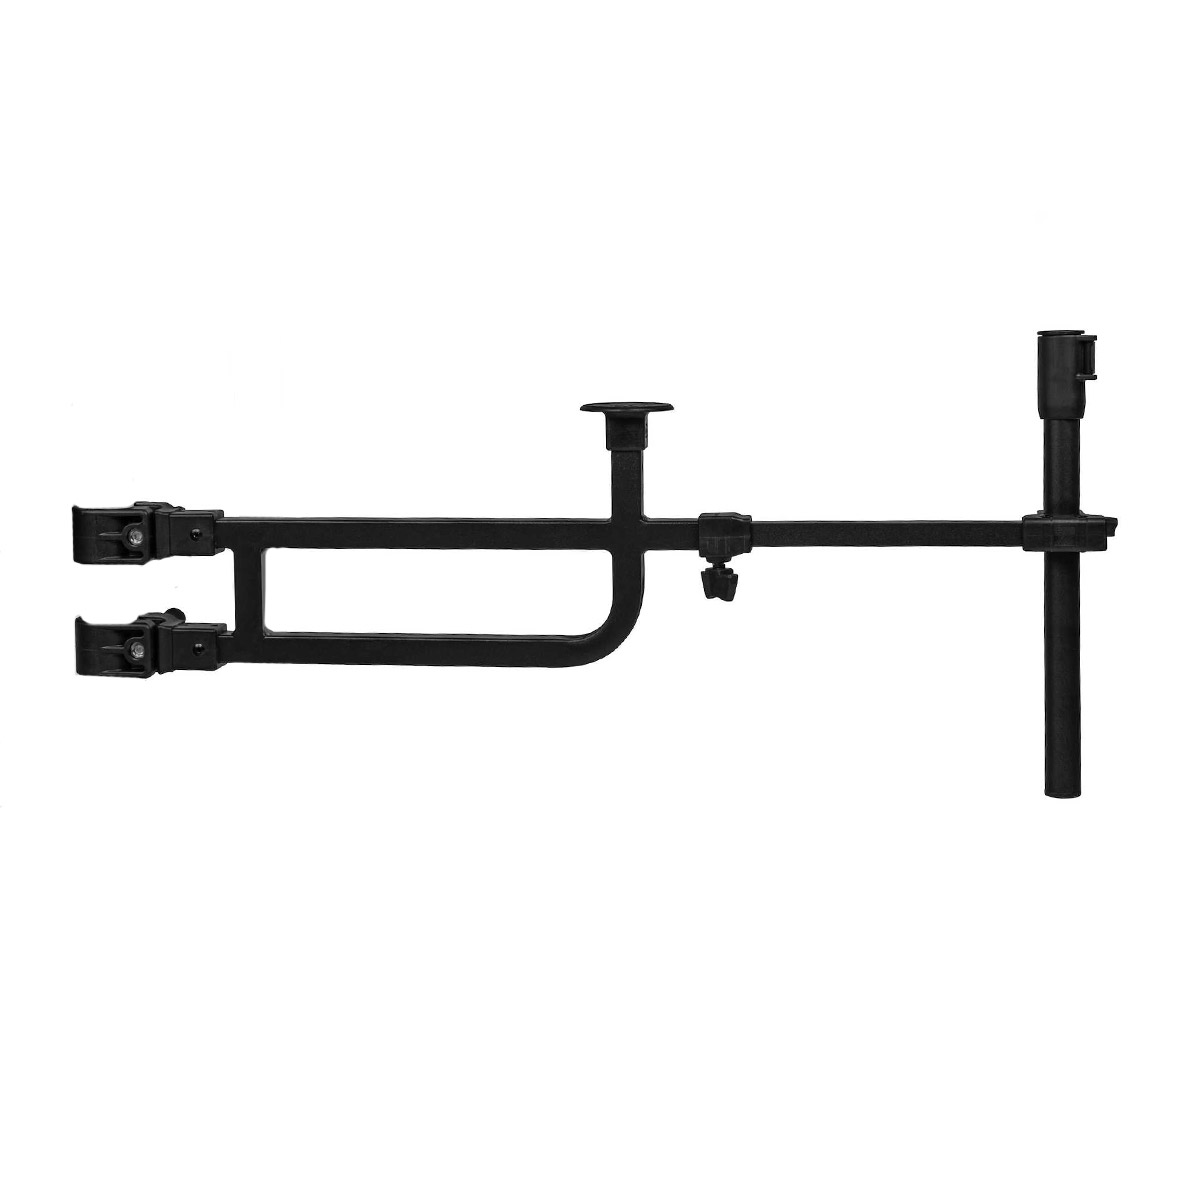 Preston Innovations Side Tray Support Accessory Arm